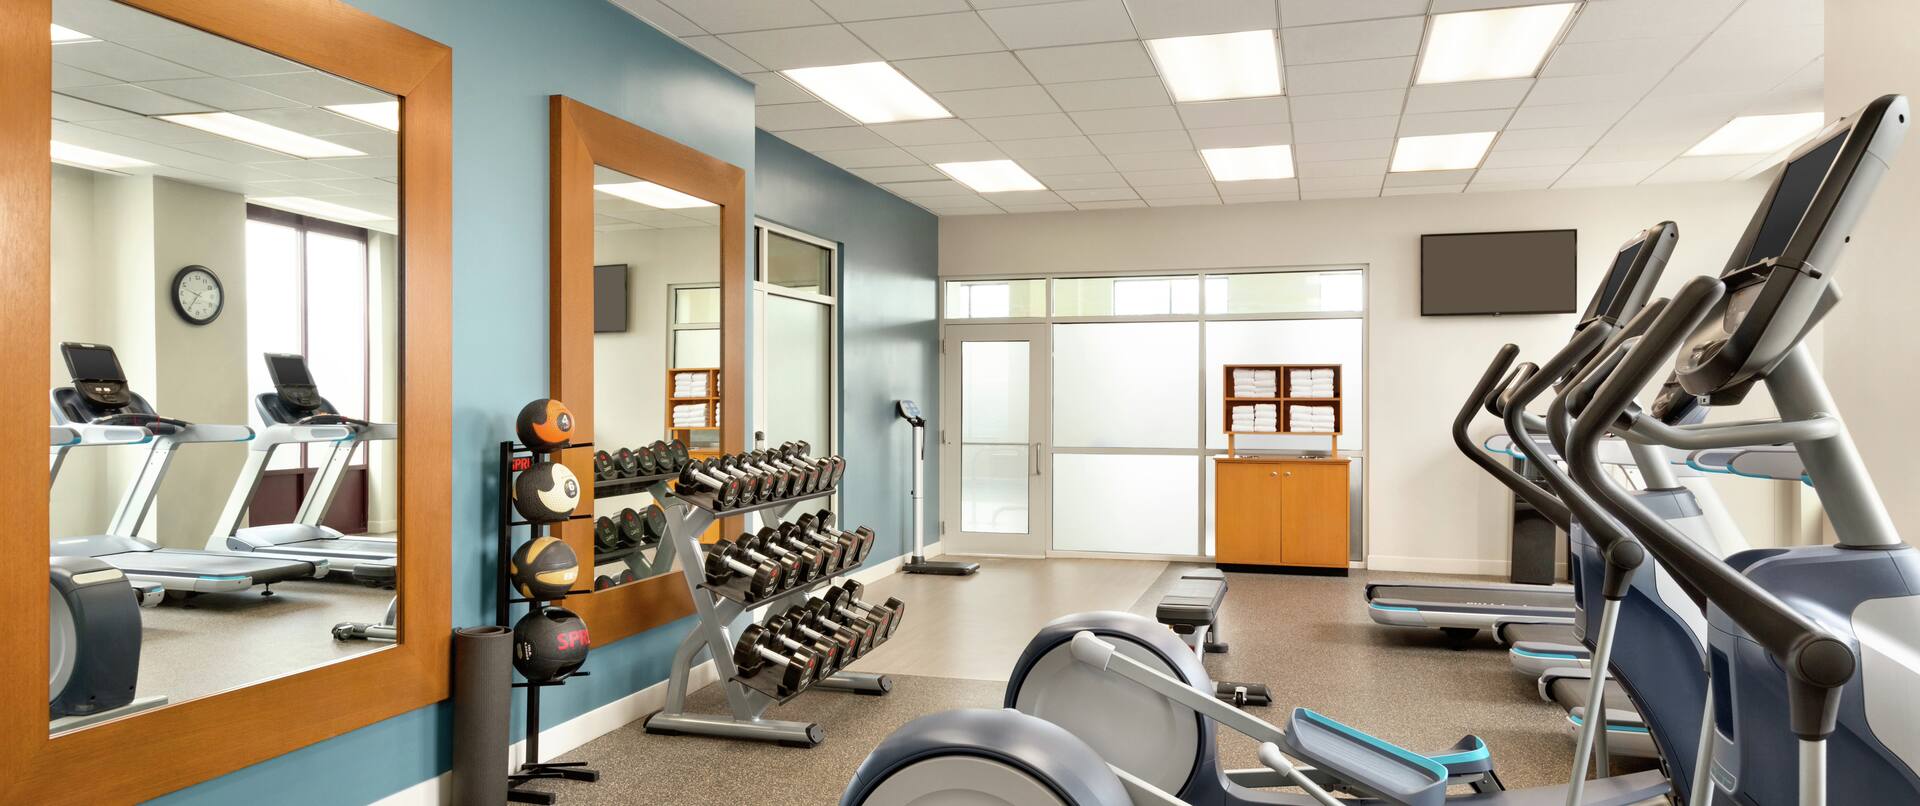 Fitness Center with Treadmills Recumbent Bikes and Weights Area